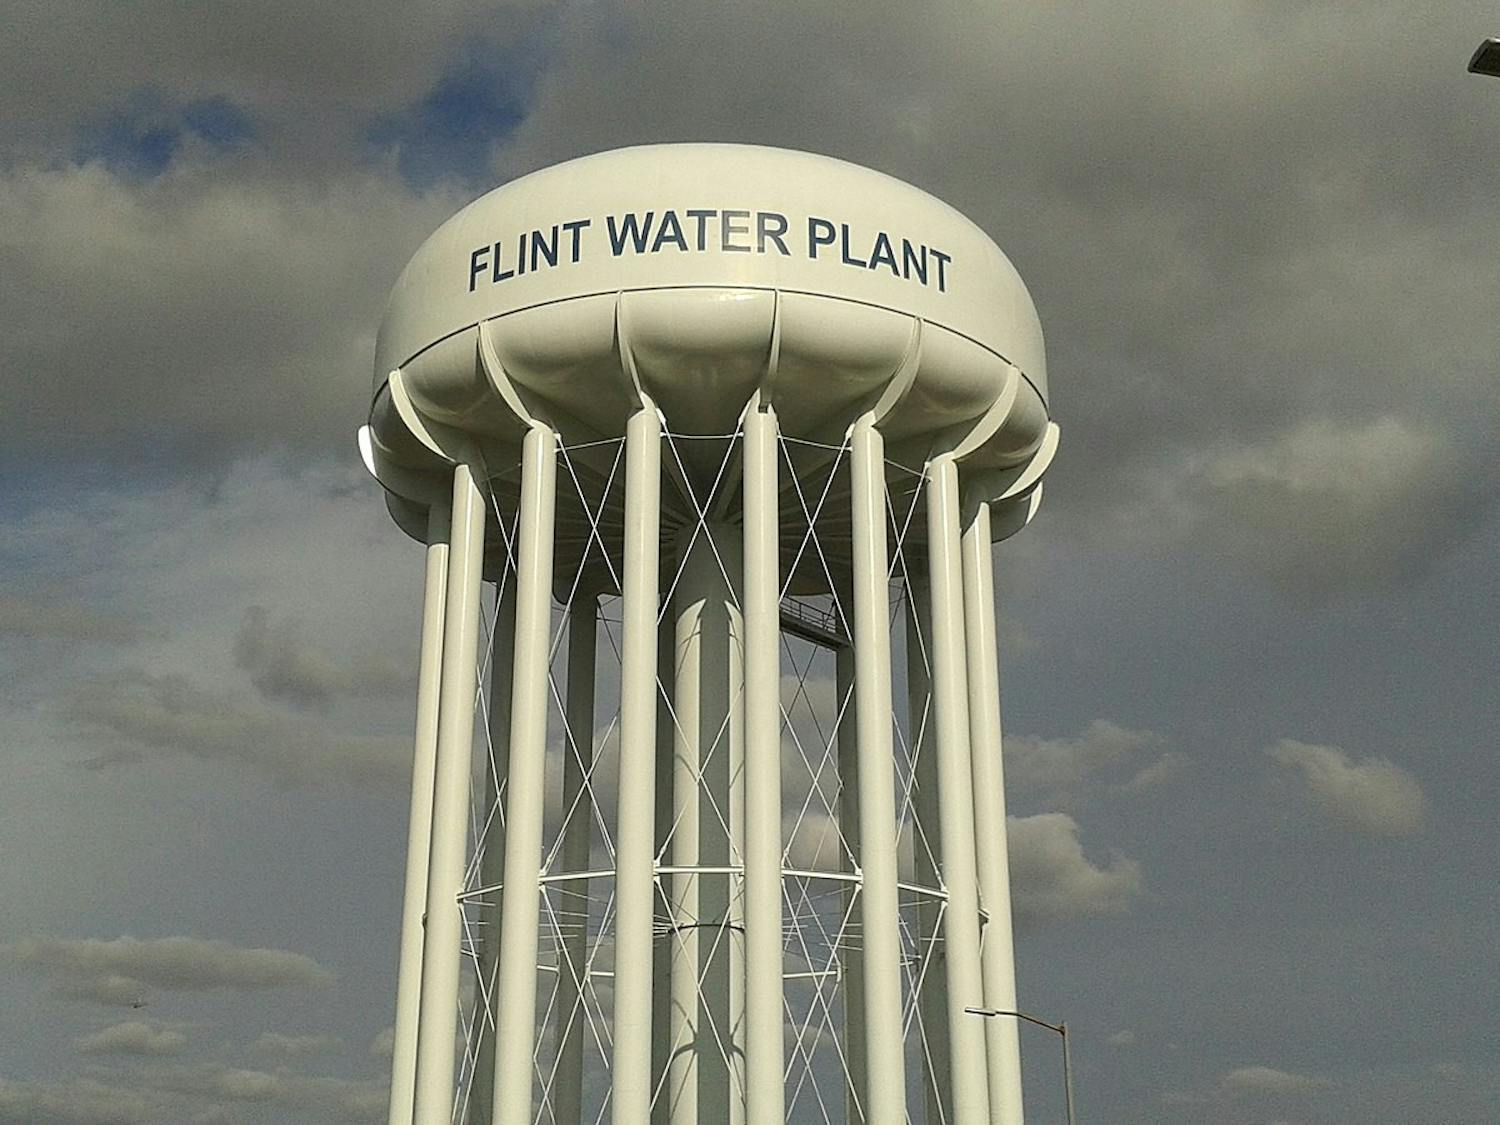 State prosecutors can no longer pursue criminal cases against former Michigan Governor Rick Snyder and other officials for their roles in the Flint water crisis(Photo courtesy of Wikimedia Commons/&quot;﻿Flint-water-treatment-plant-tower&quot; by United States Environmental Protection Agency. April 11, 2016). 